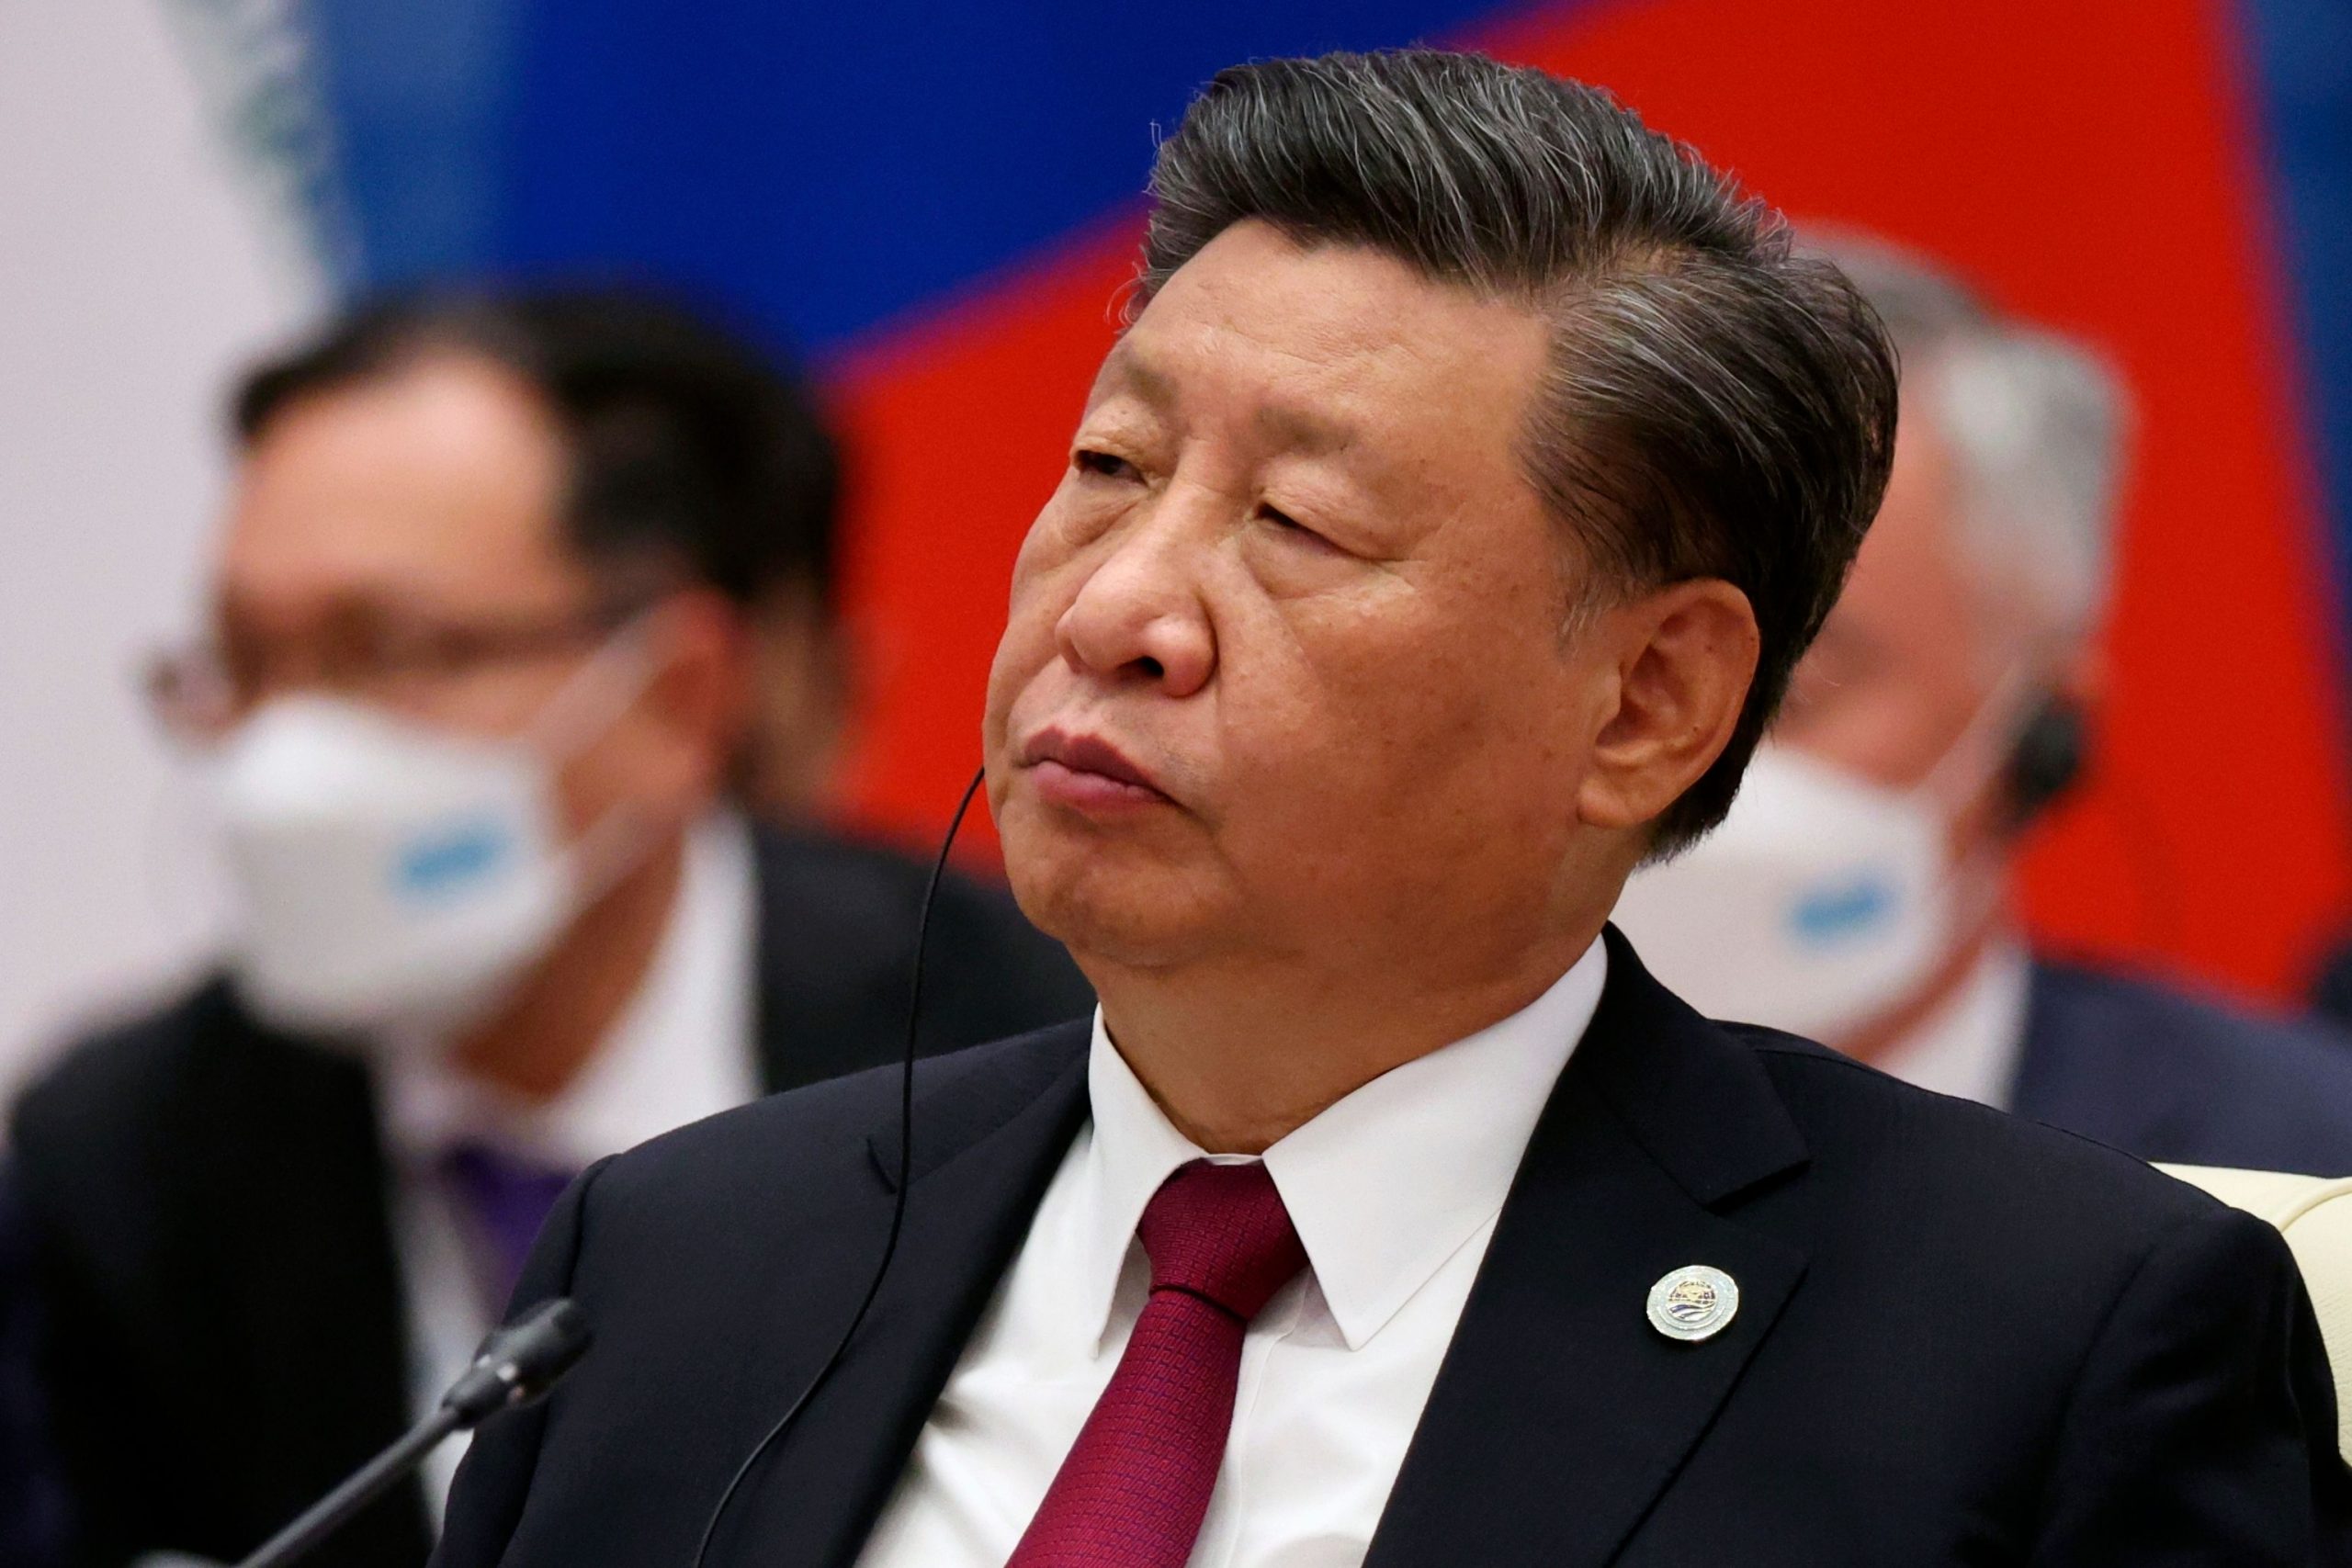 SCO Summit 2022: How China plans to counter ‘colour revolutions’